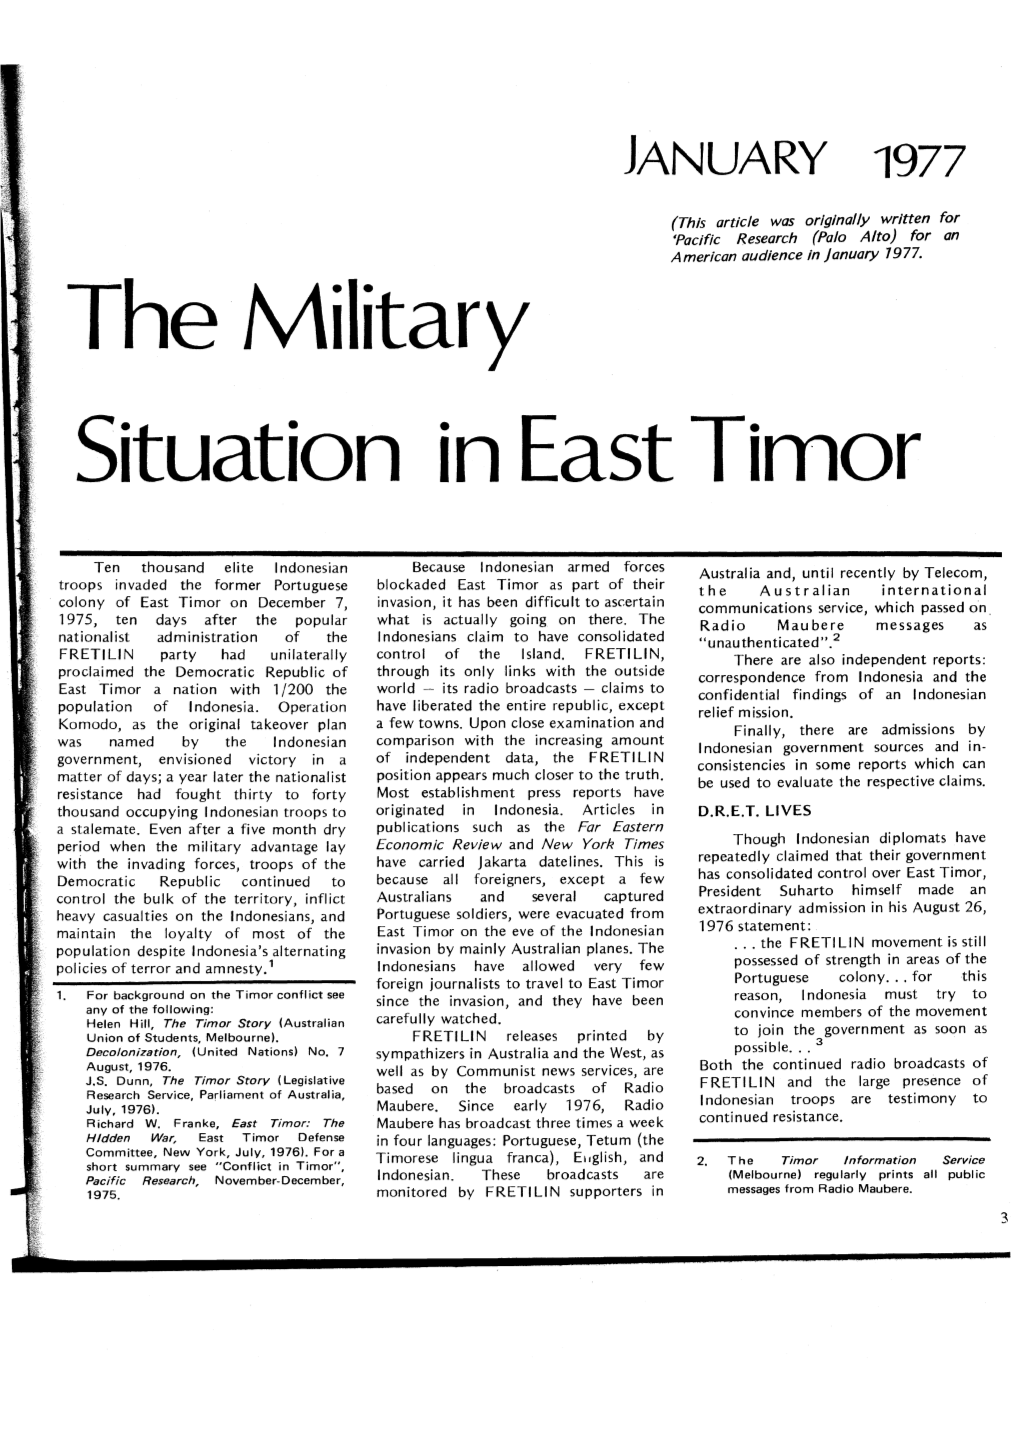 The Military Situation in East Timor